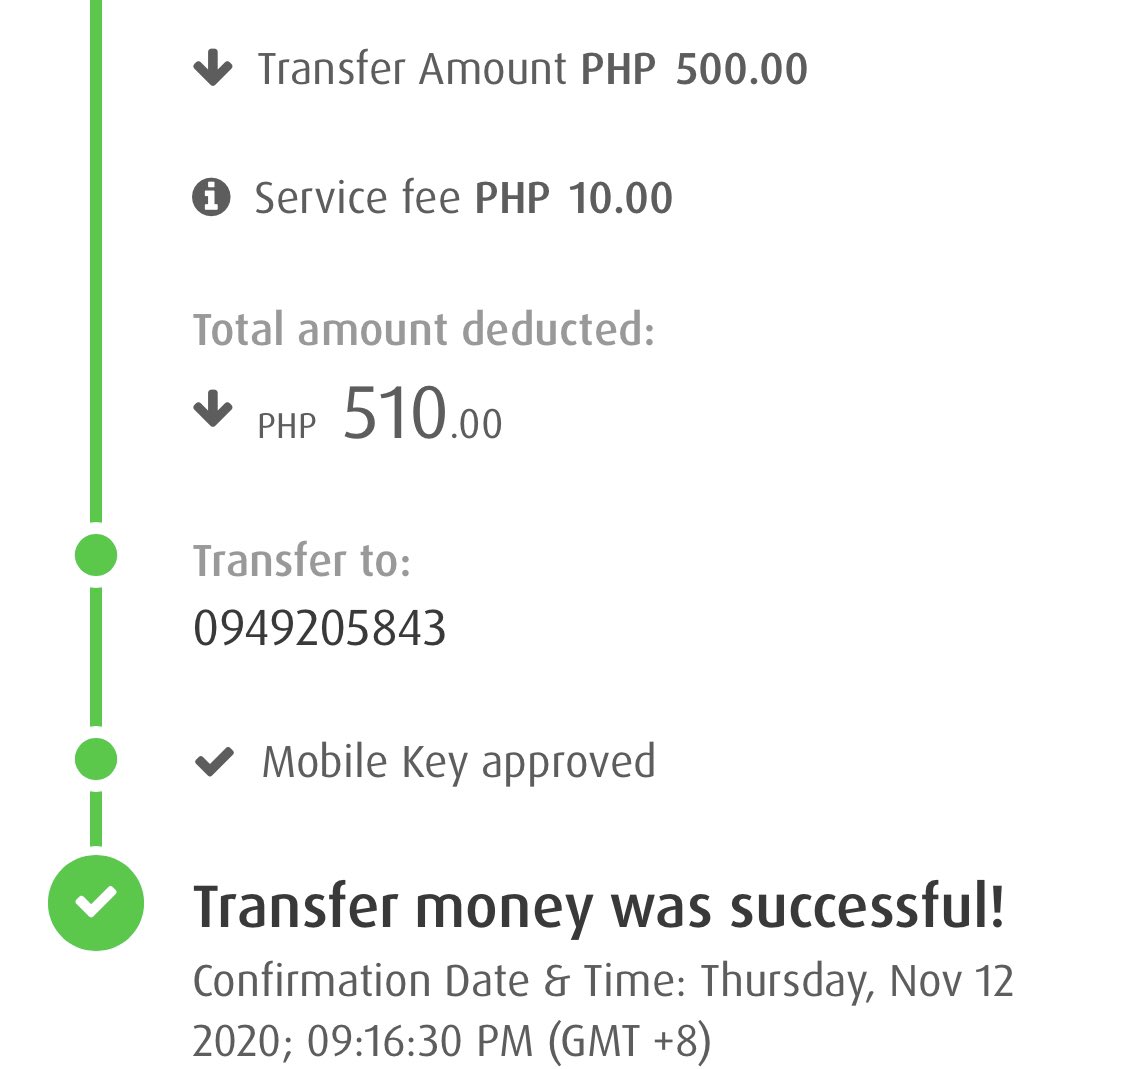 Donated ₱500 to the Aeta Community Feeding Center that's sending relief packs for three affected Aeta communities in Zambales. Match me.  https://twitter.com/notvalidself/status/1326800129999966208?s=21  https://twitter.com/notvalidself/status/1326800129999966208